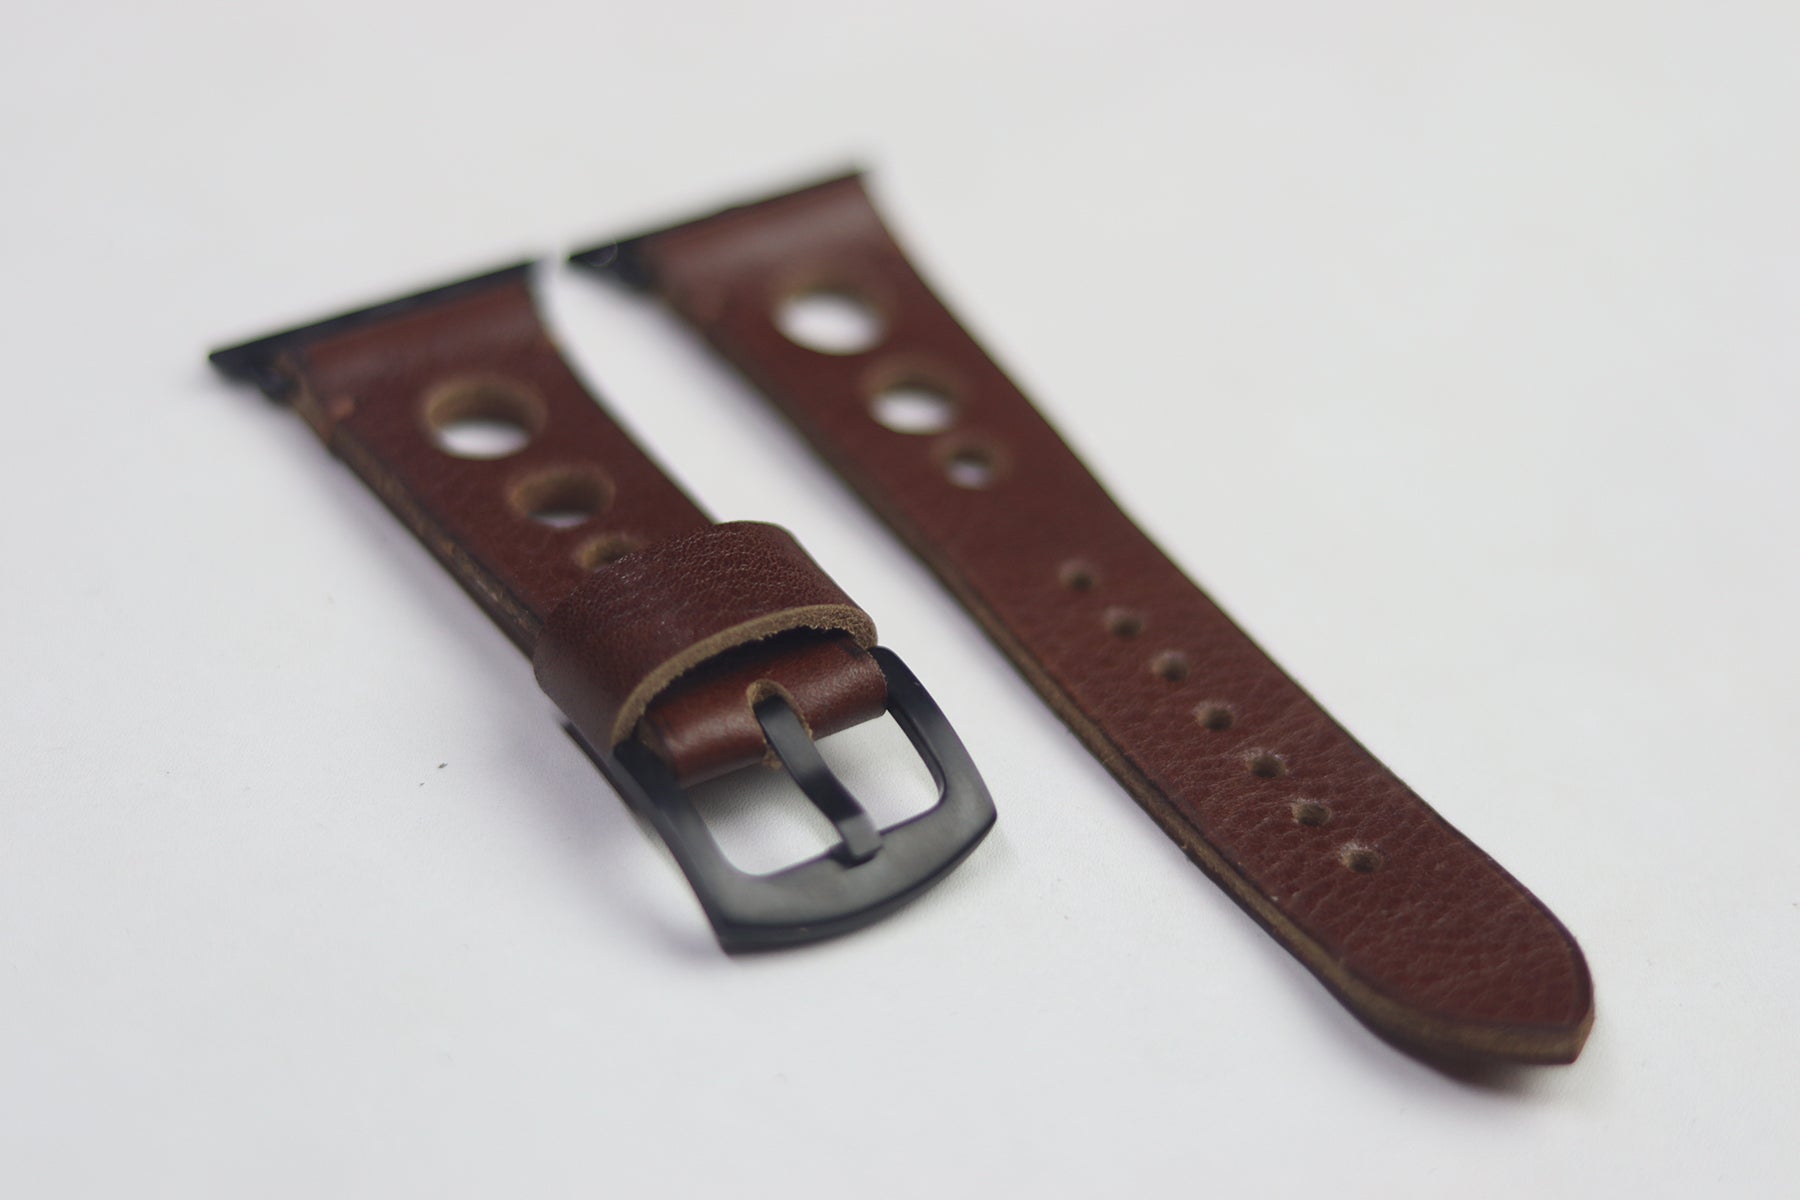 GINGERBREAD BROWN HAND-CRAFTED APPLE WATCH STRAPS